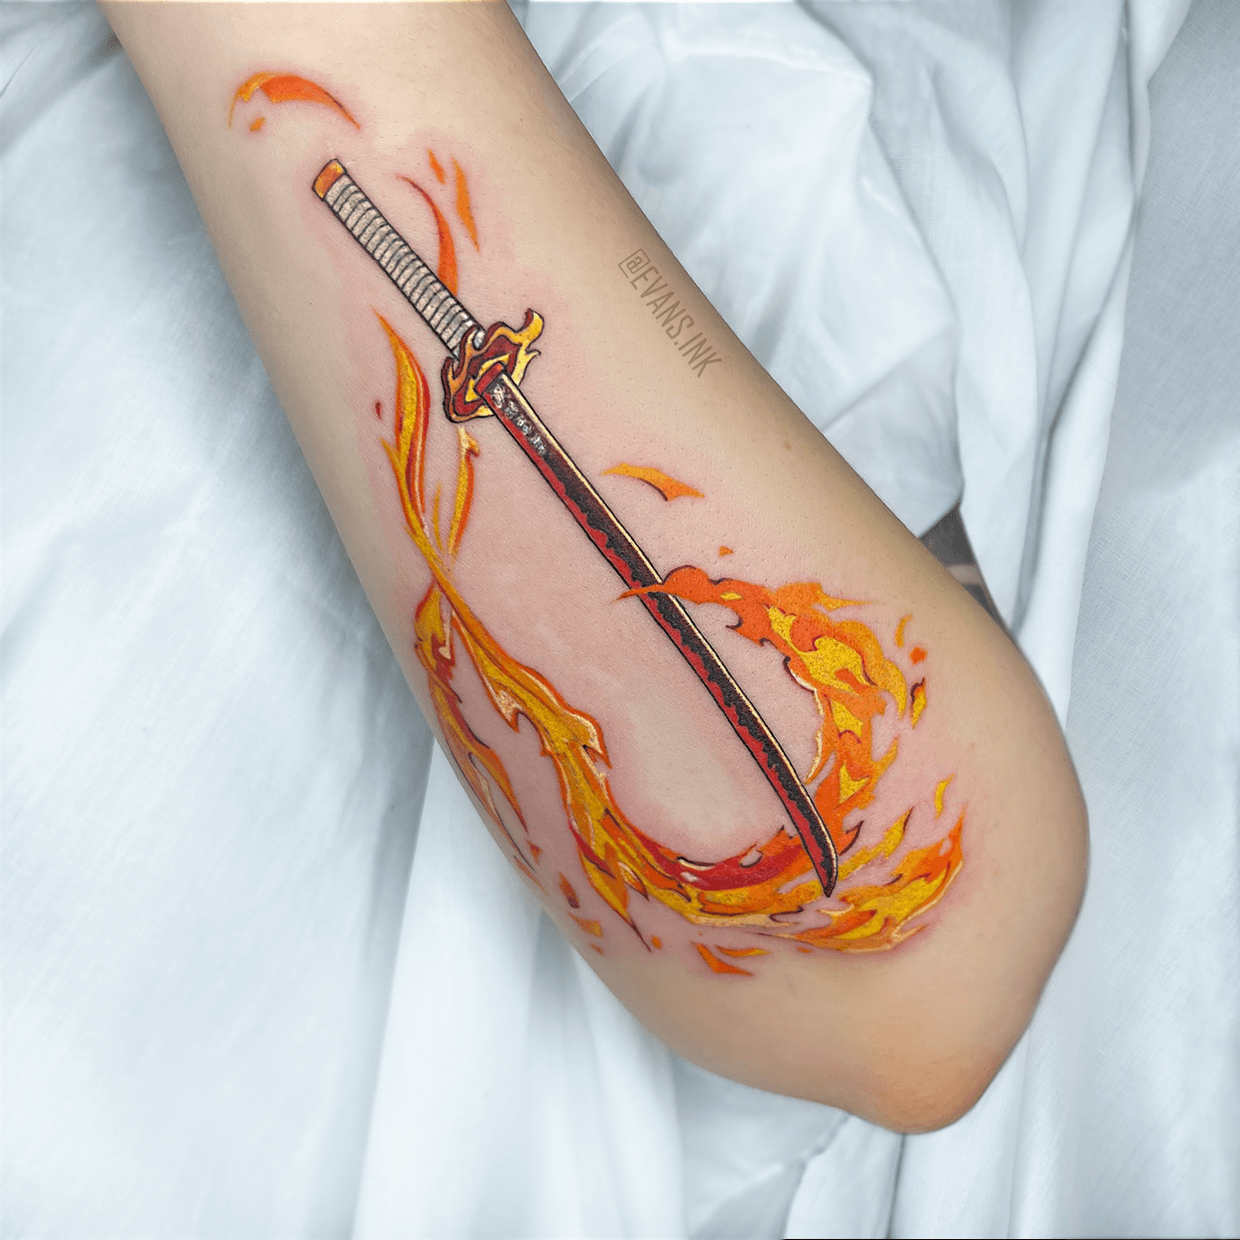 Tanjuro Kamado tattoo. Is everyone enjoying the new season of Demon Slayer  so far? Hang out with me on Twitch every Tuesday - Saturday around 12:30pm  CST at twitch.tv/jerredkincaid! Come chat and